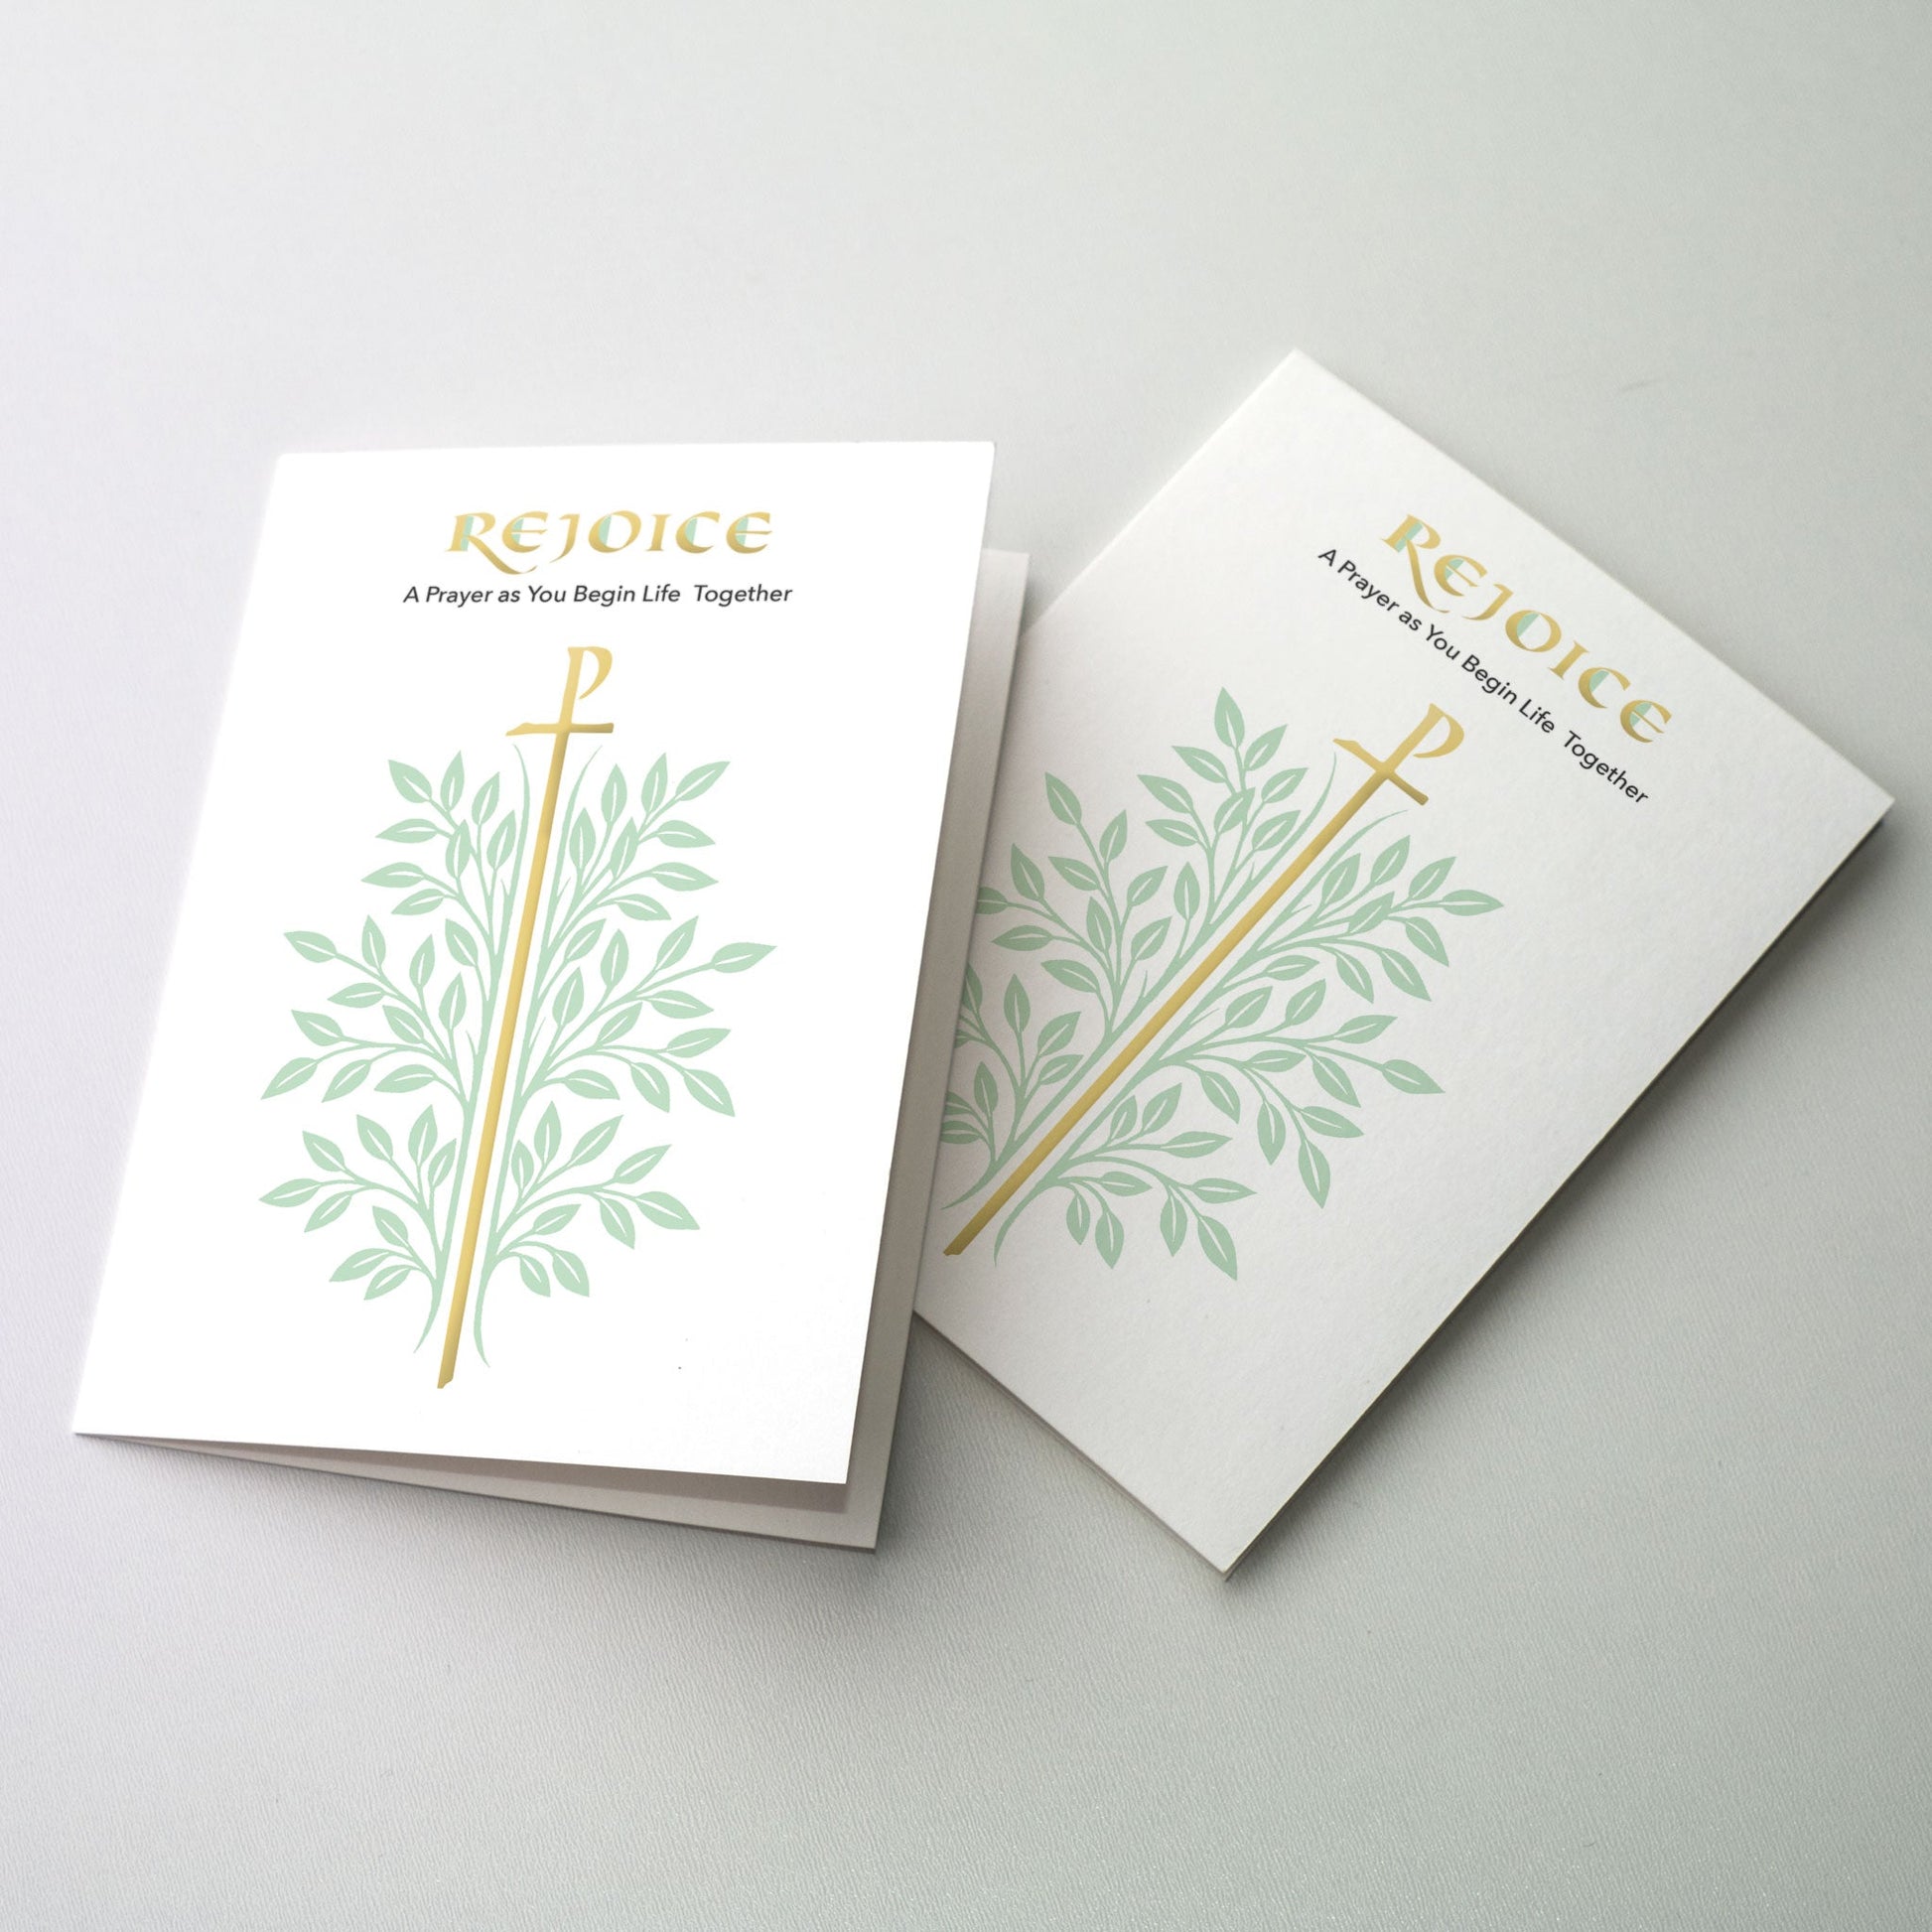 Soft green leaves with gold foil callipgrahy and Chi Rho